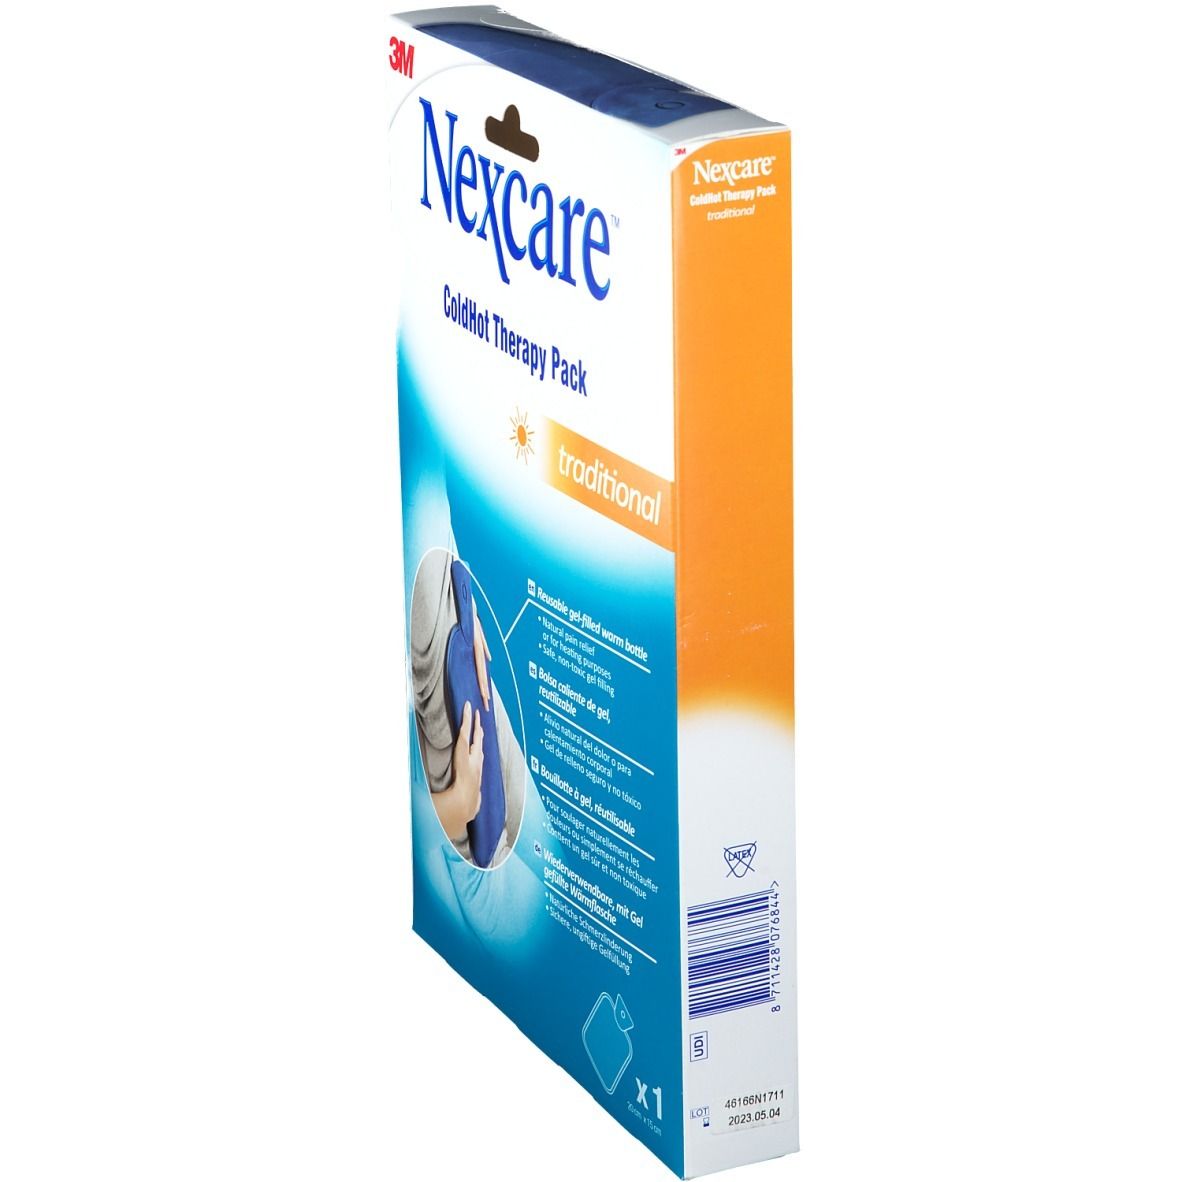 Nexcare™ ColdHot Therapy Pack traditional (Couleur non sélectionnable)